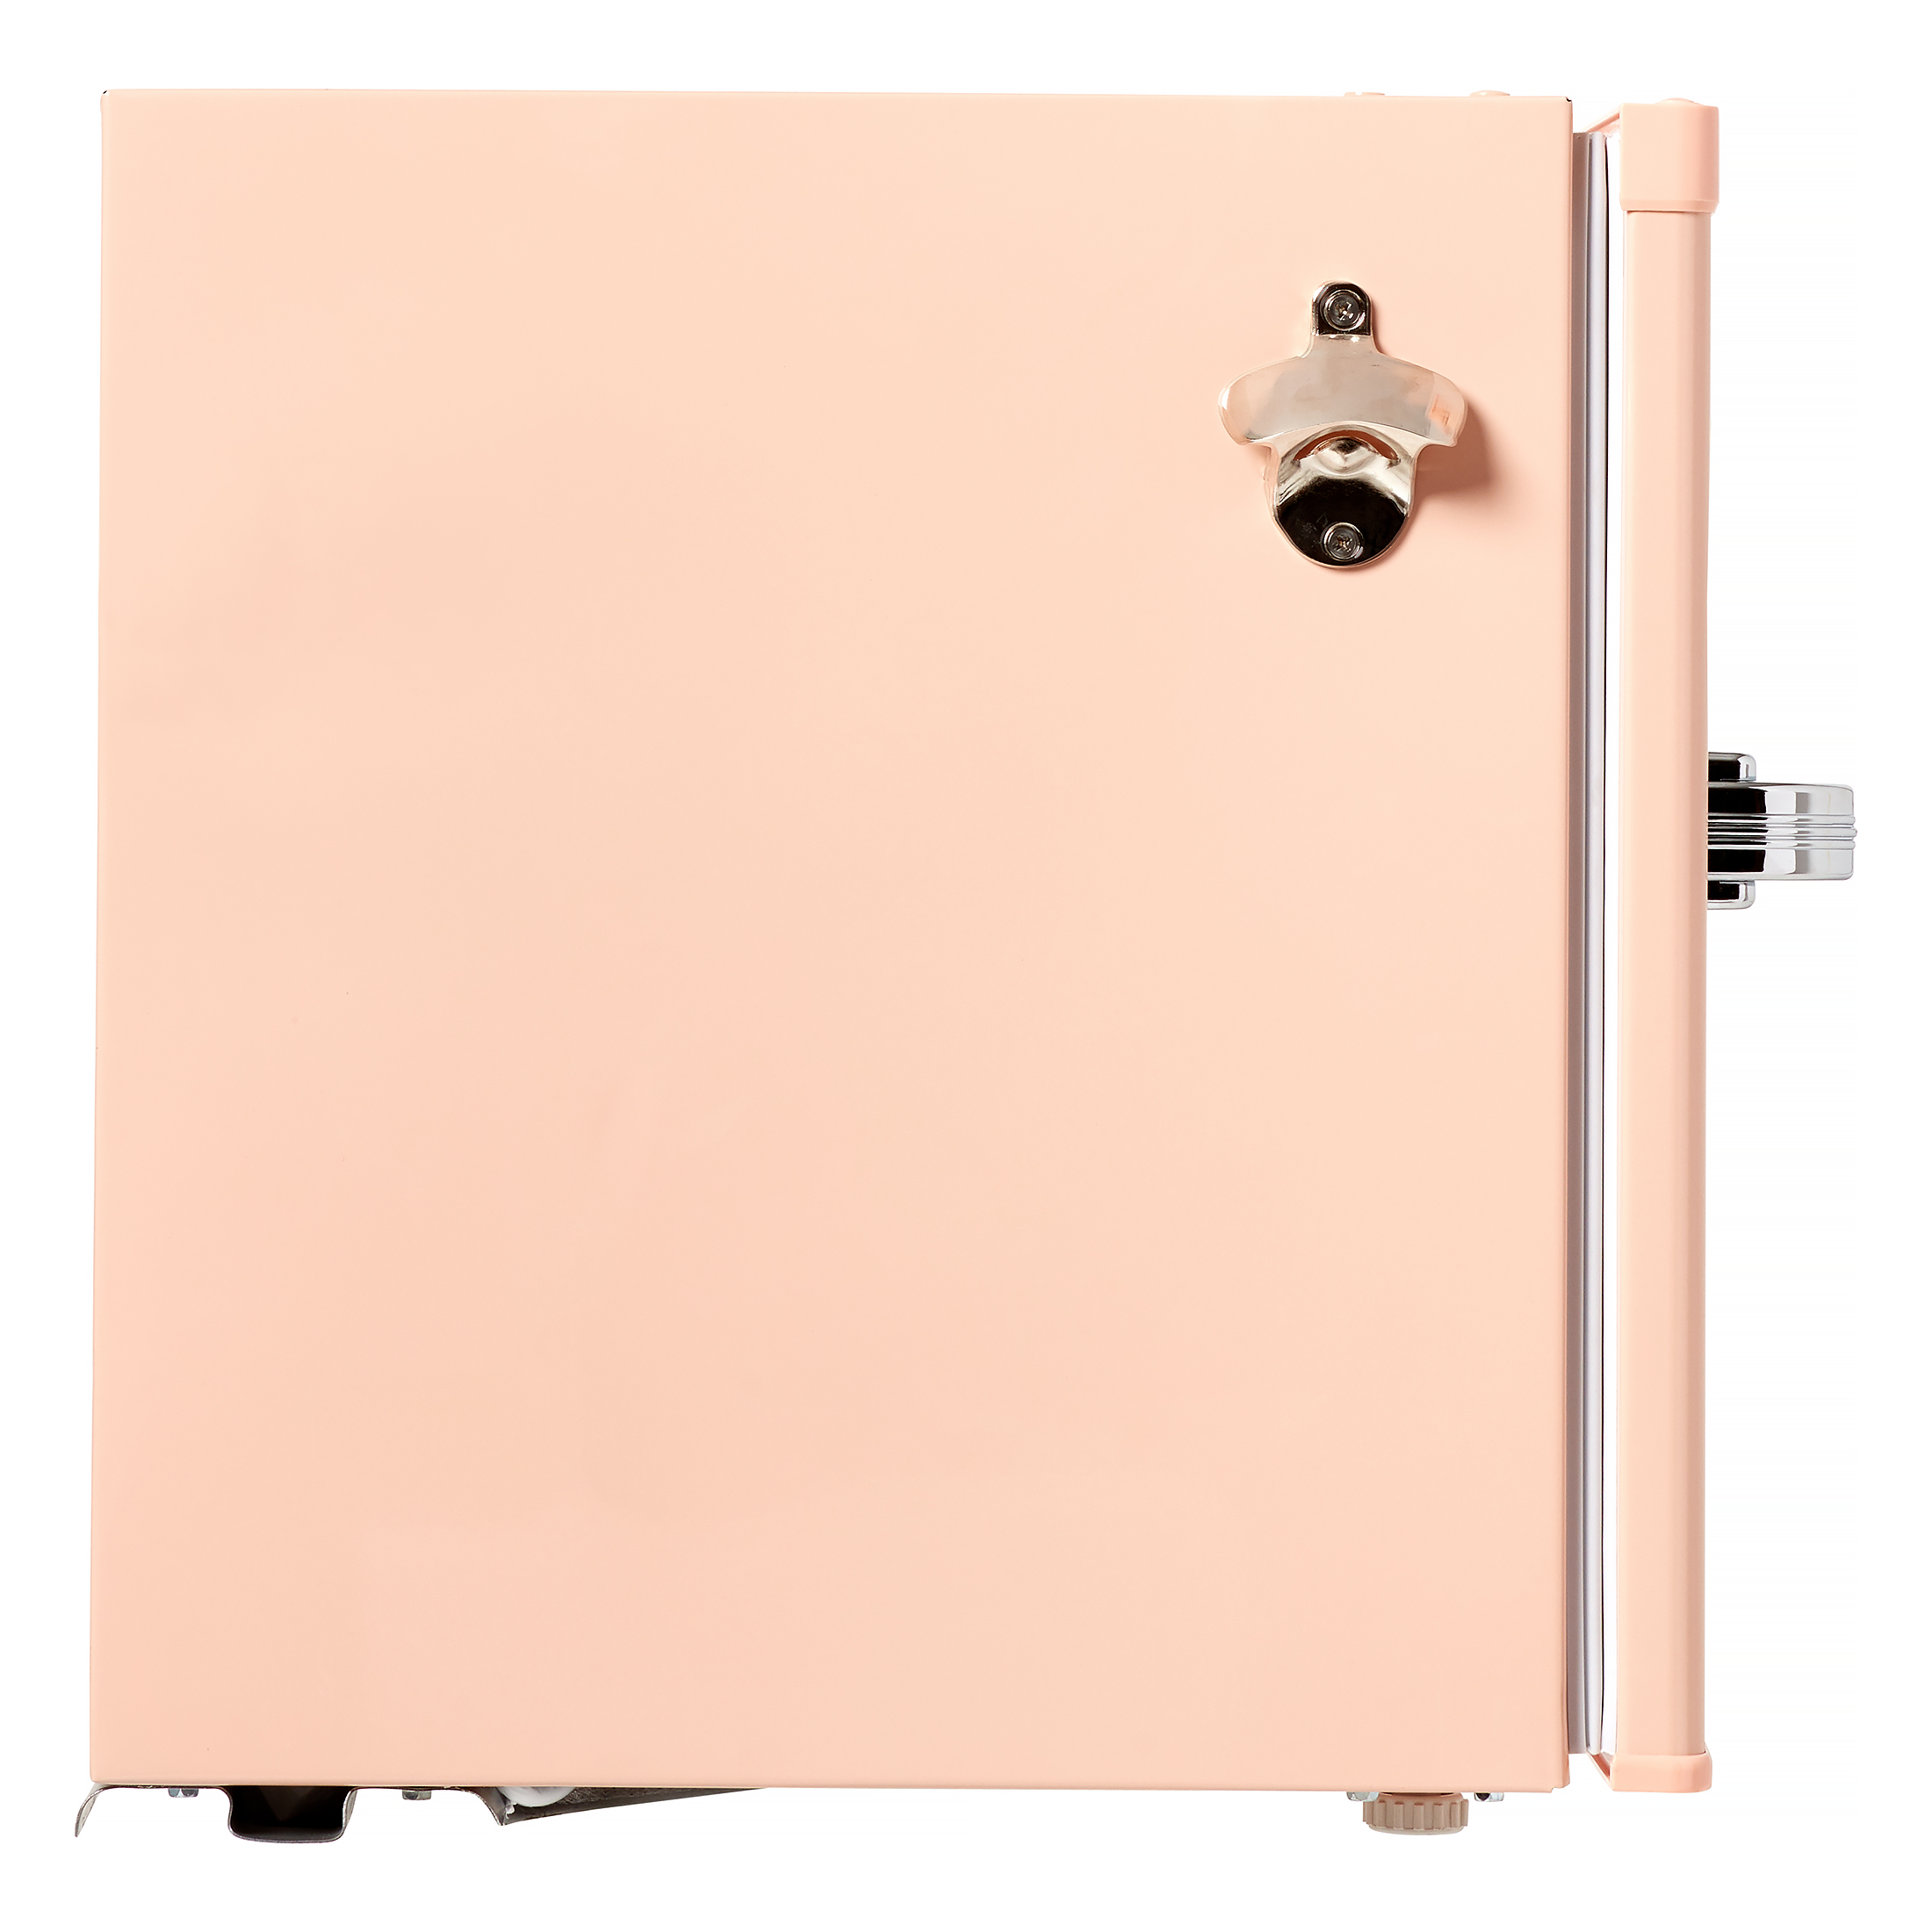 Frigidaire 1.6 Cu ft. Retro Compact Refrigerator with Side Bottle Opener, Coral - image 2 of 7